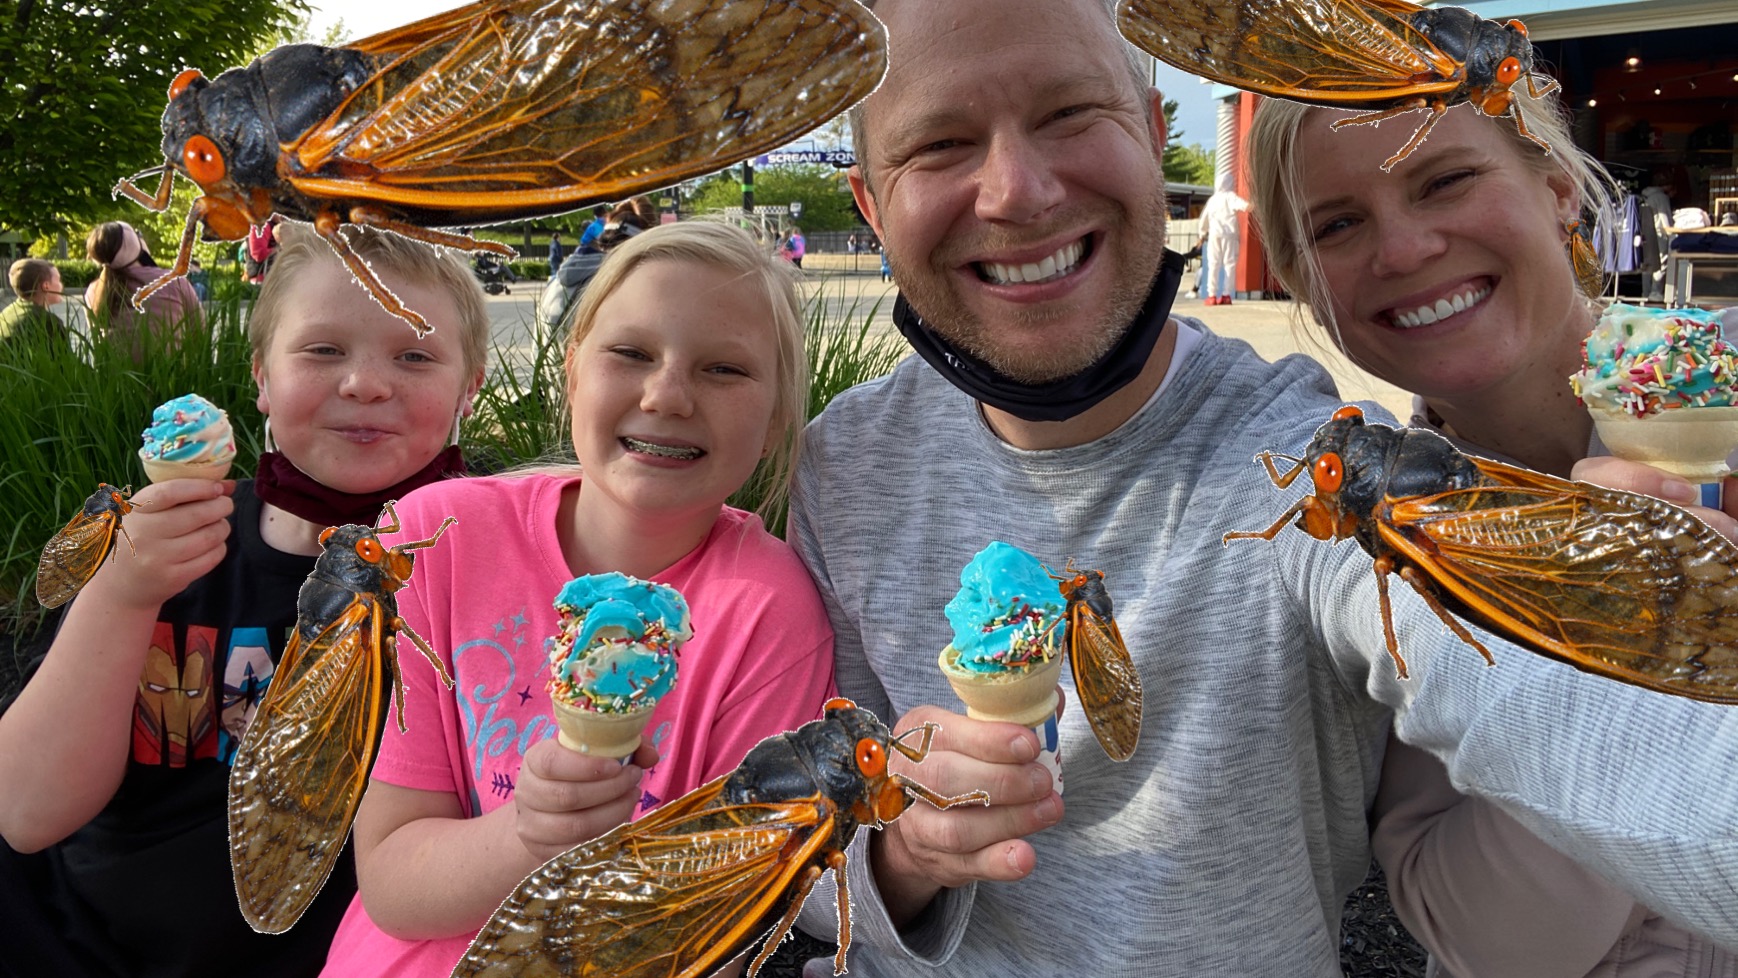 Artistic depiction of what the 2021 Brood X Cicadas will look like on the Joel Willis family.